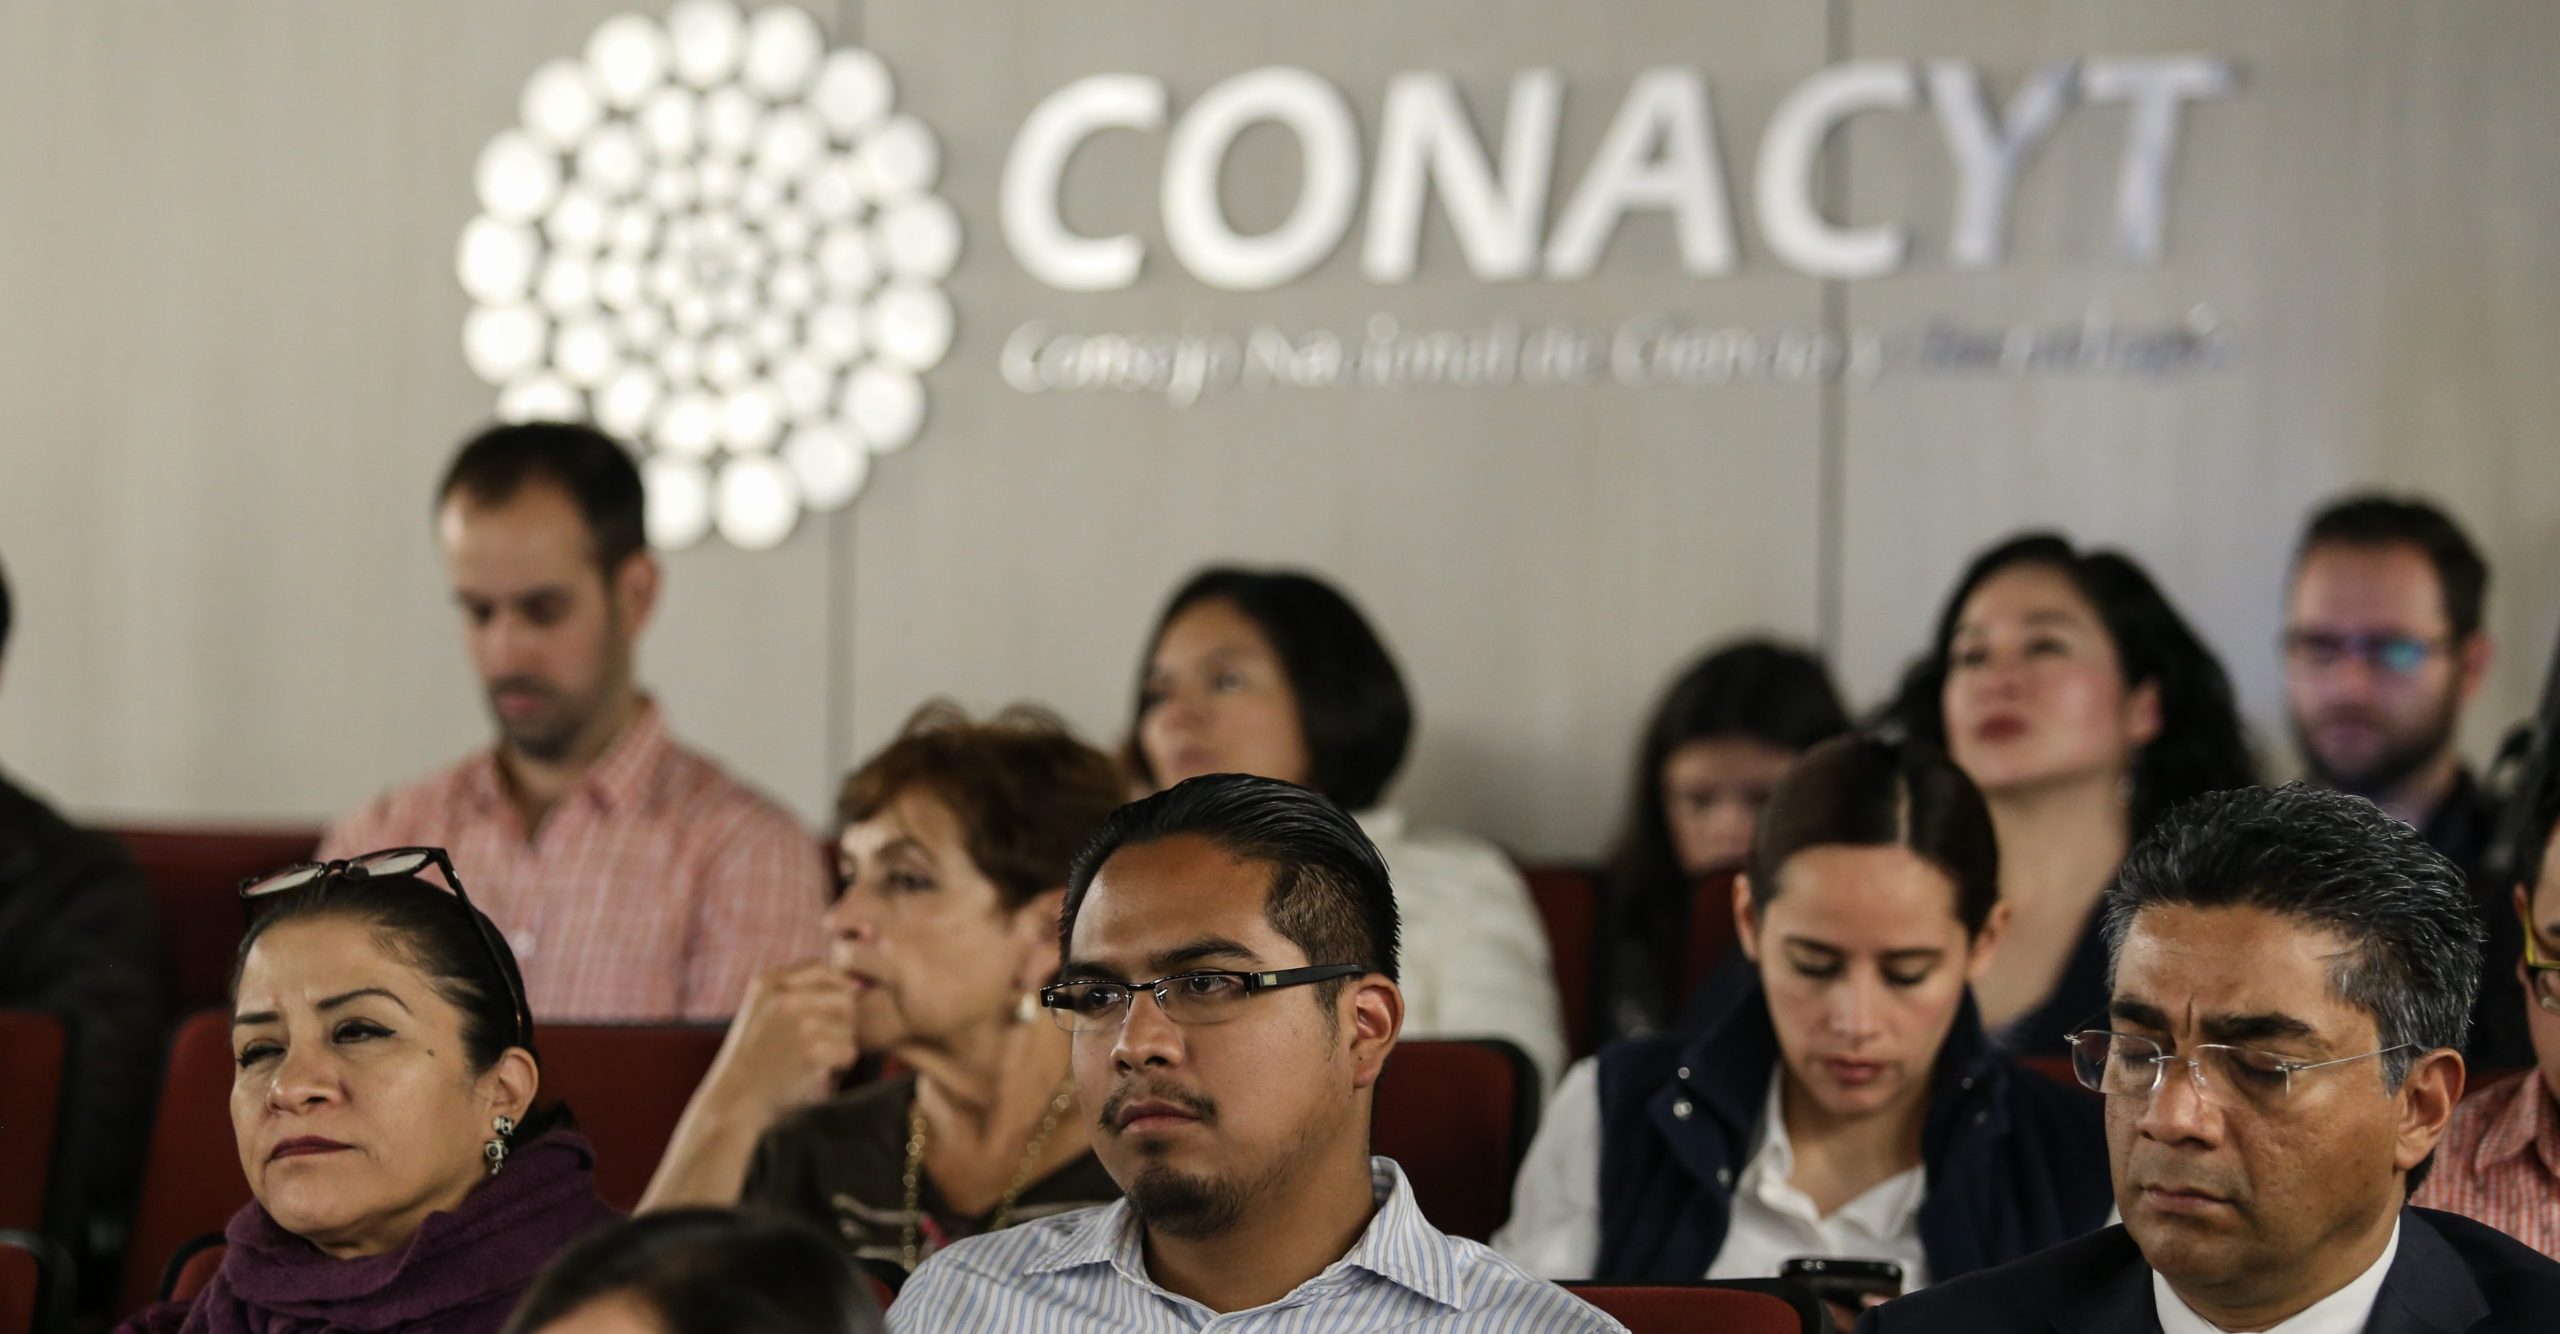 Conacyt conditions program to professors, asks them to look for a job